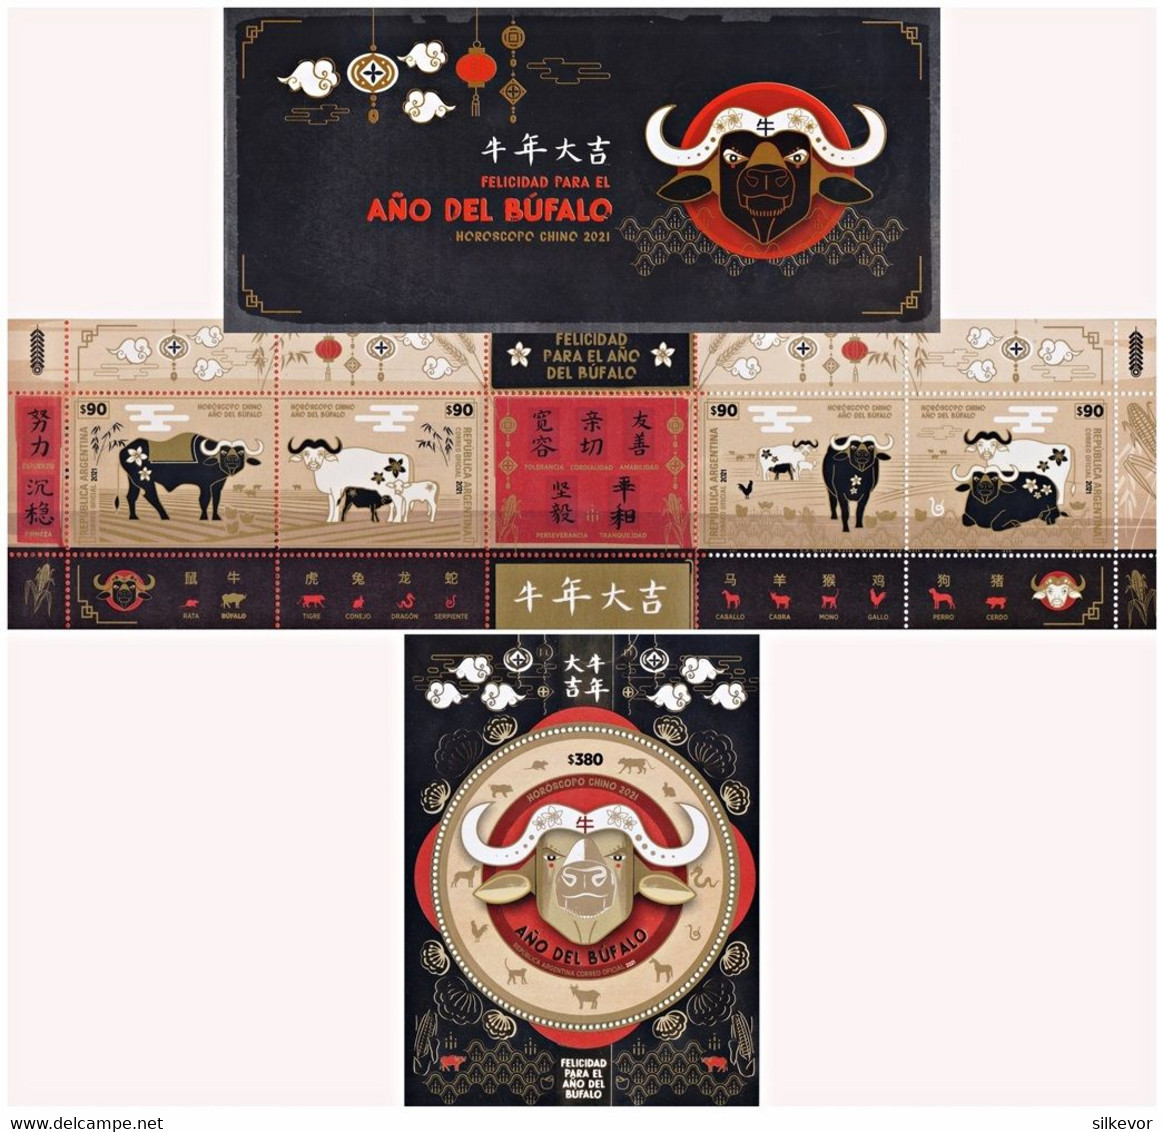 ARGENTINA-2021-STAMPS-YEAR OF THE BUFALO-CHINESE HOROSCOPE- BOOKLET + SOUVENIR SHEET-MNH- SEE IMAGE!! - Neufs